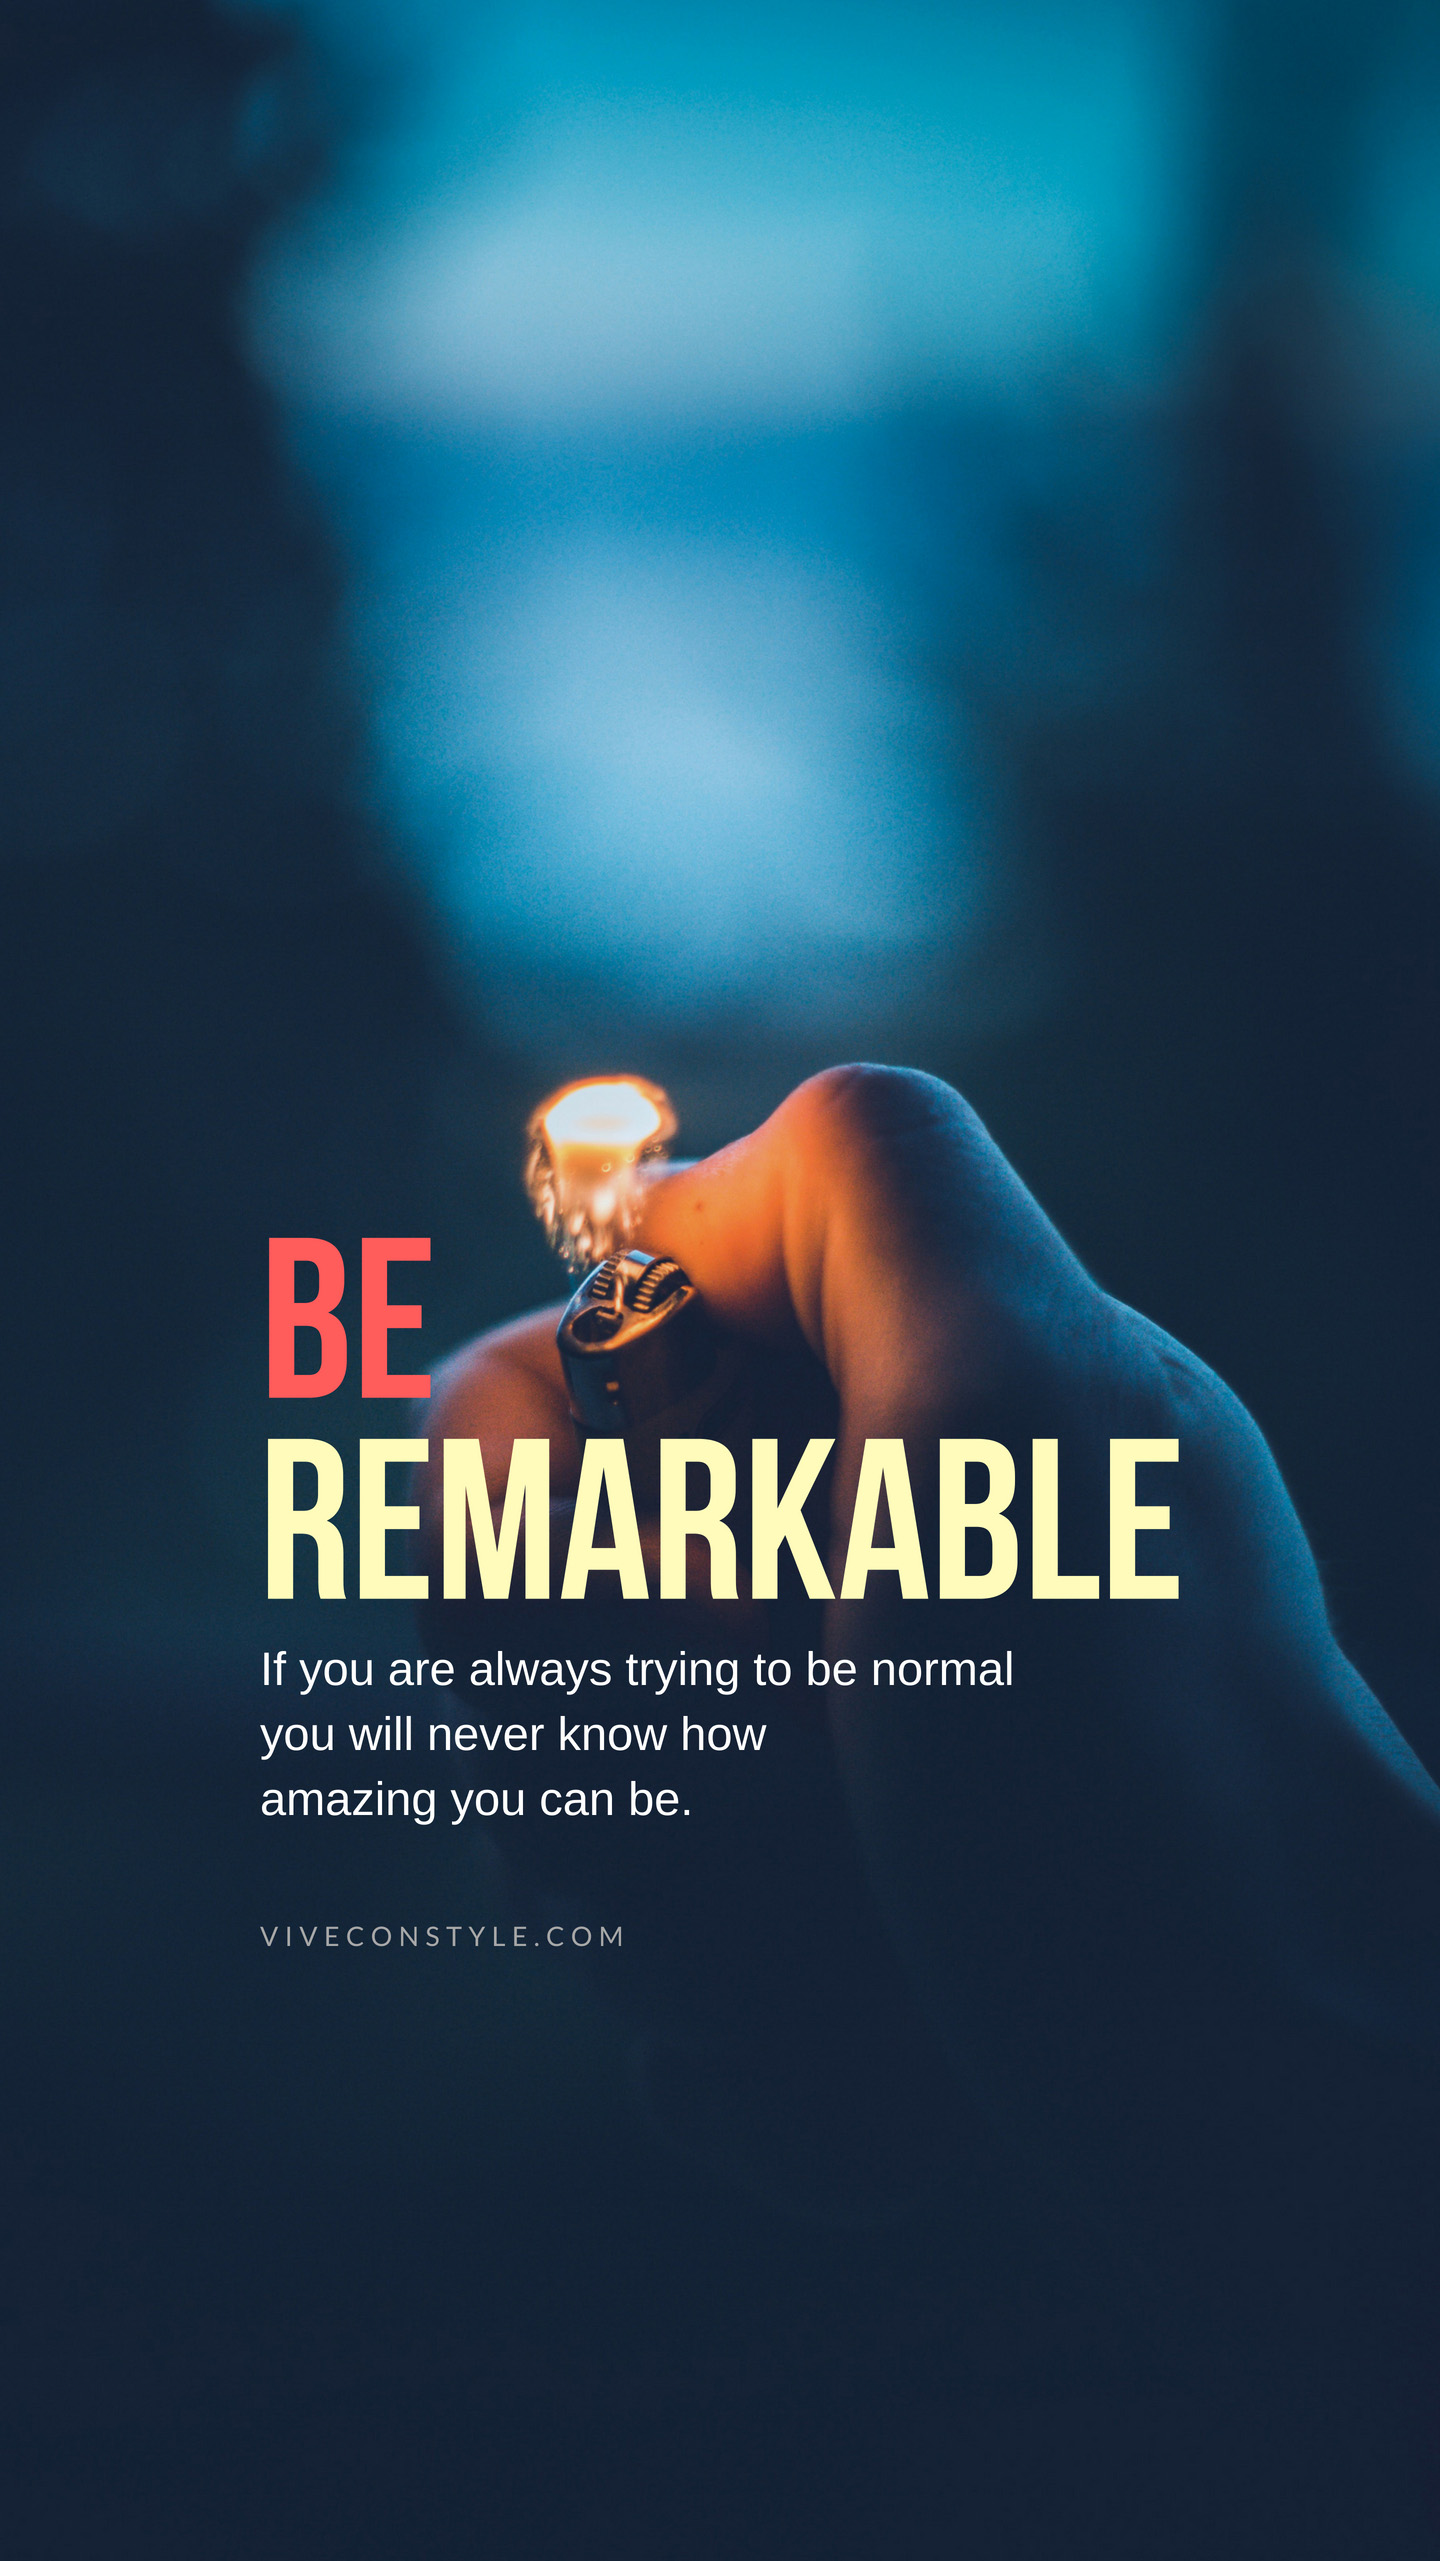 Be Remarkable Vive Con Style